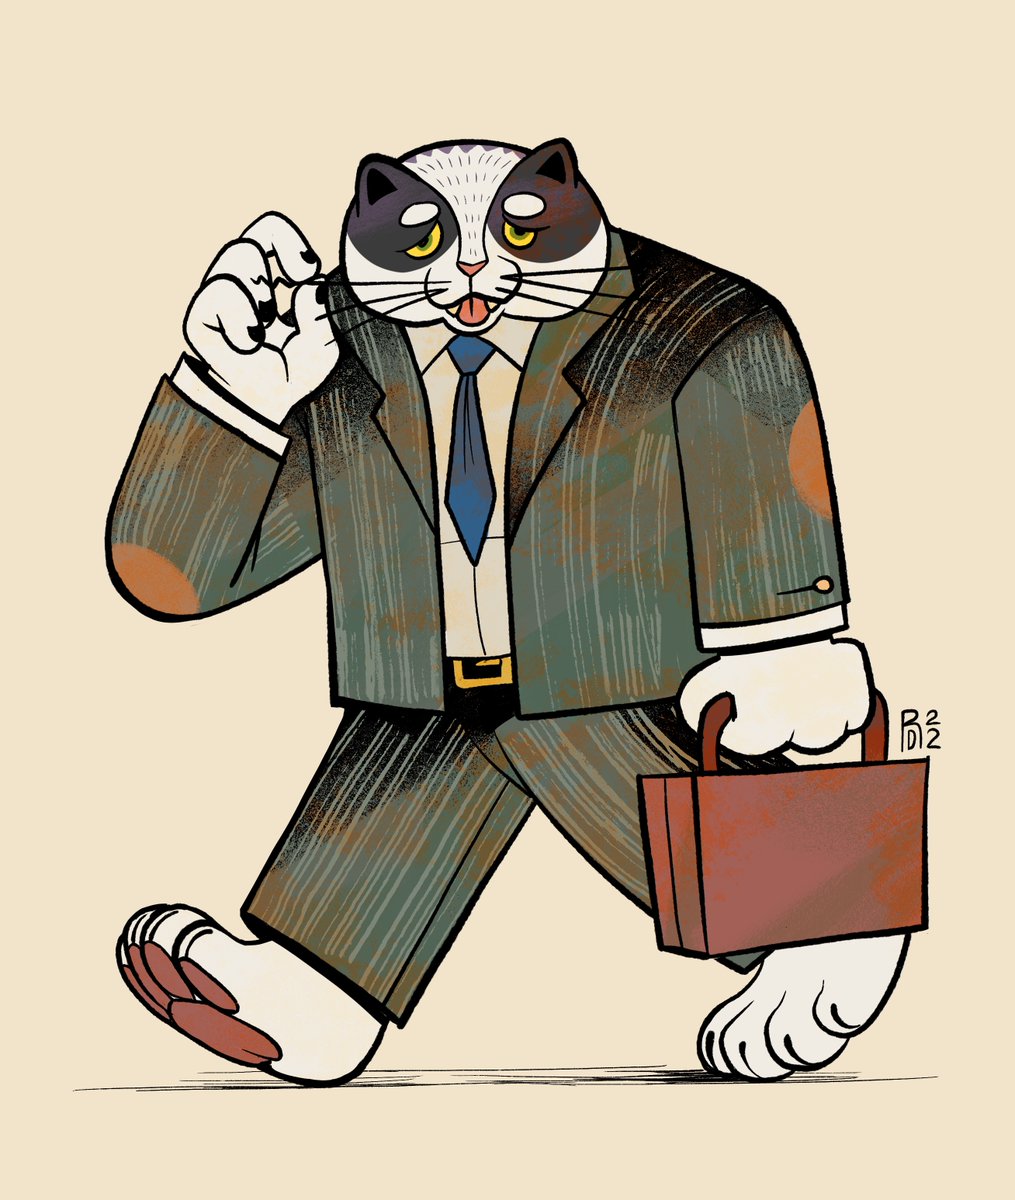 「Business cat! That case sure was brief 」|Dominique Ramsey𓃞のイラスト